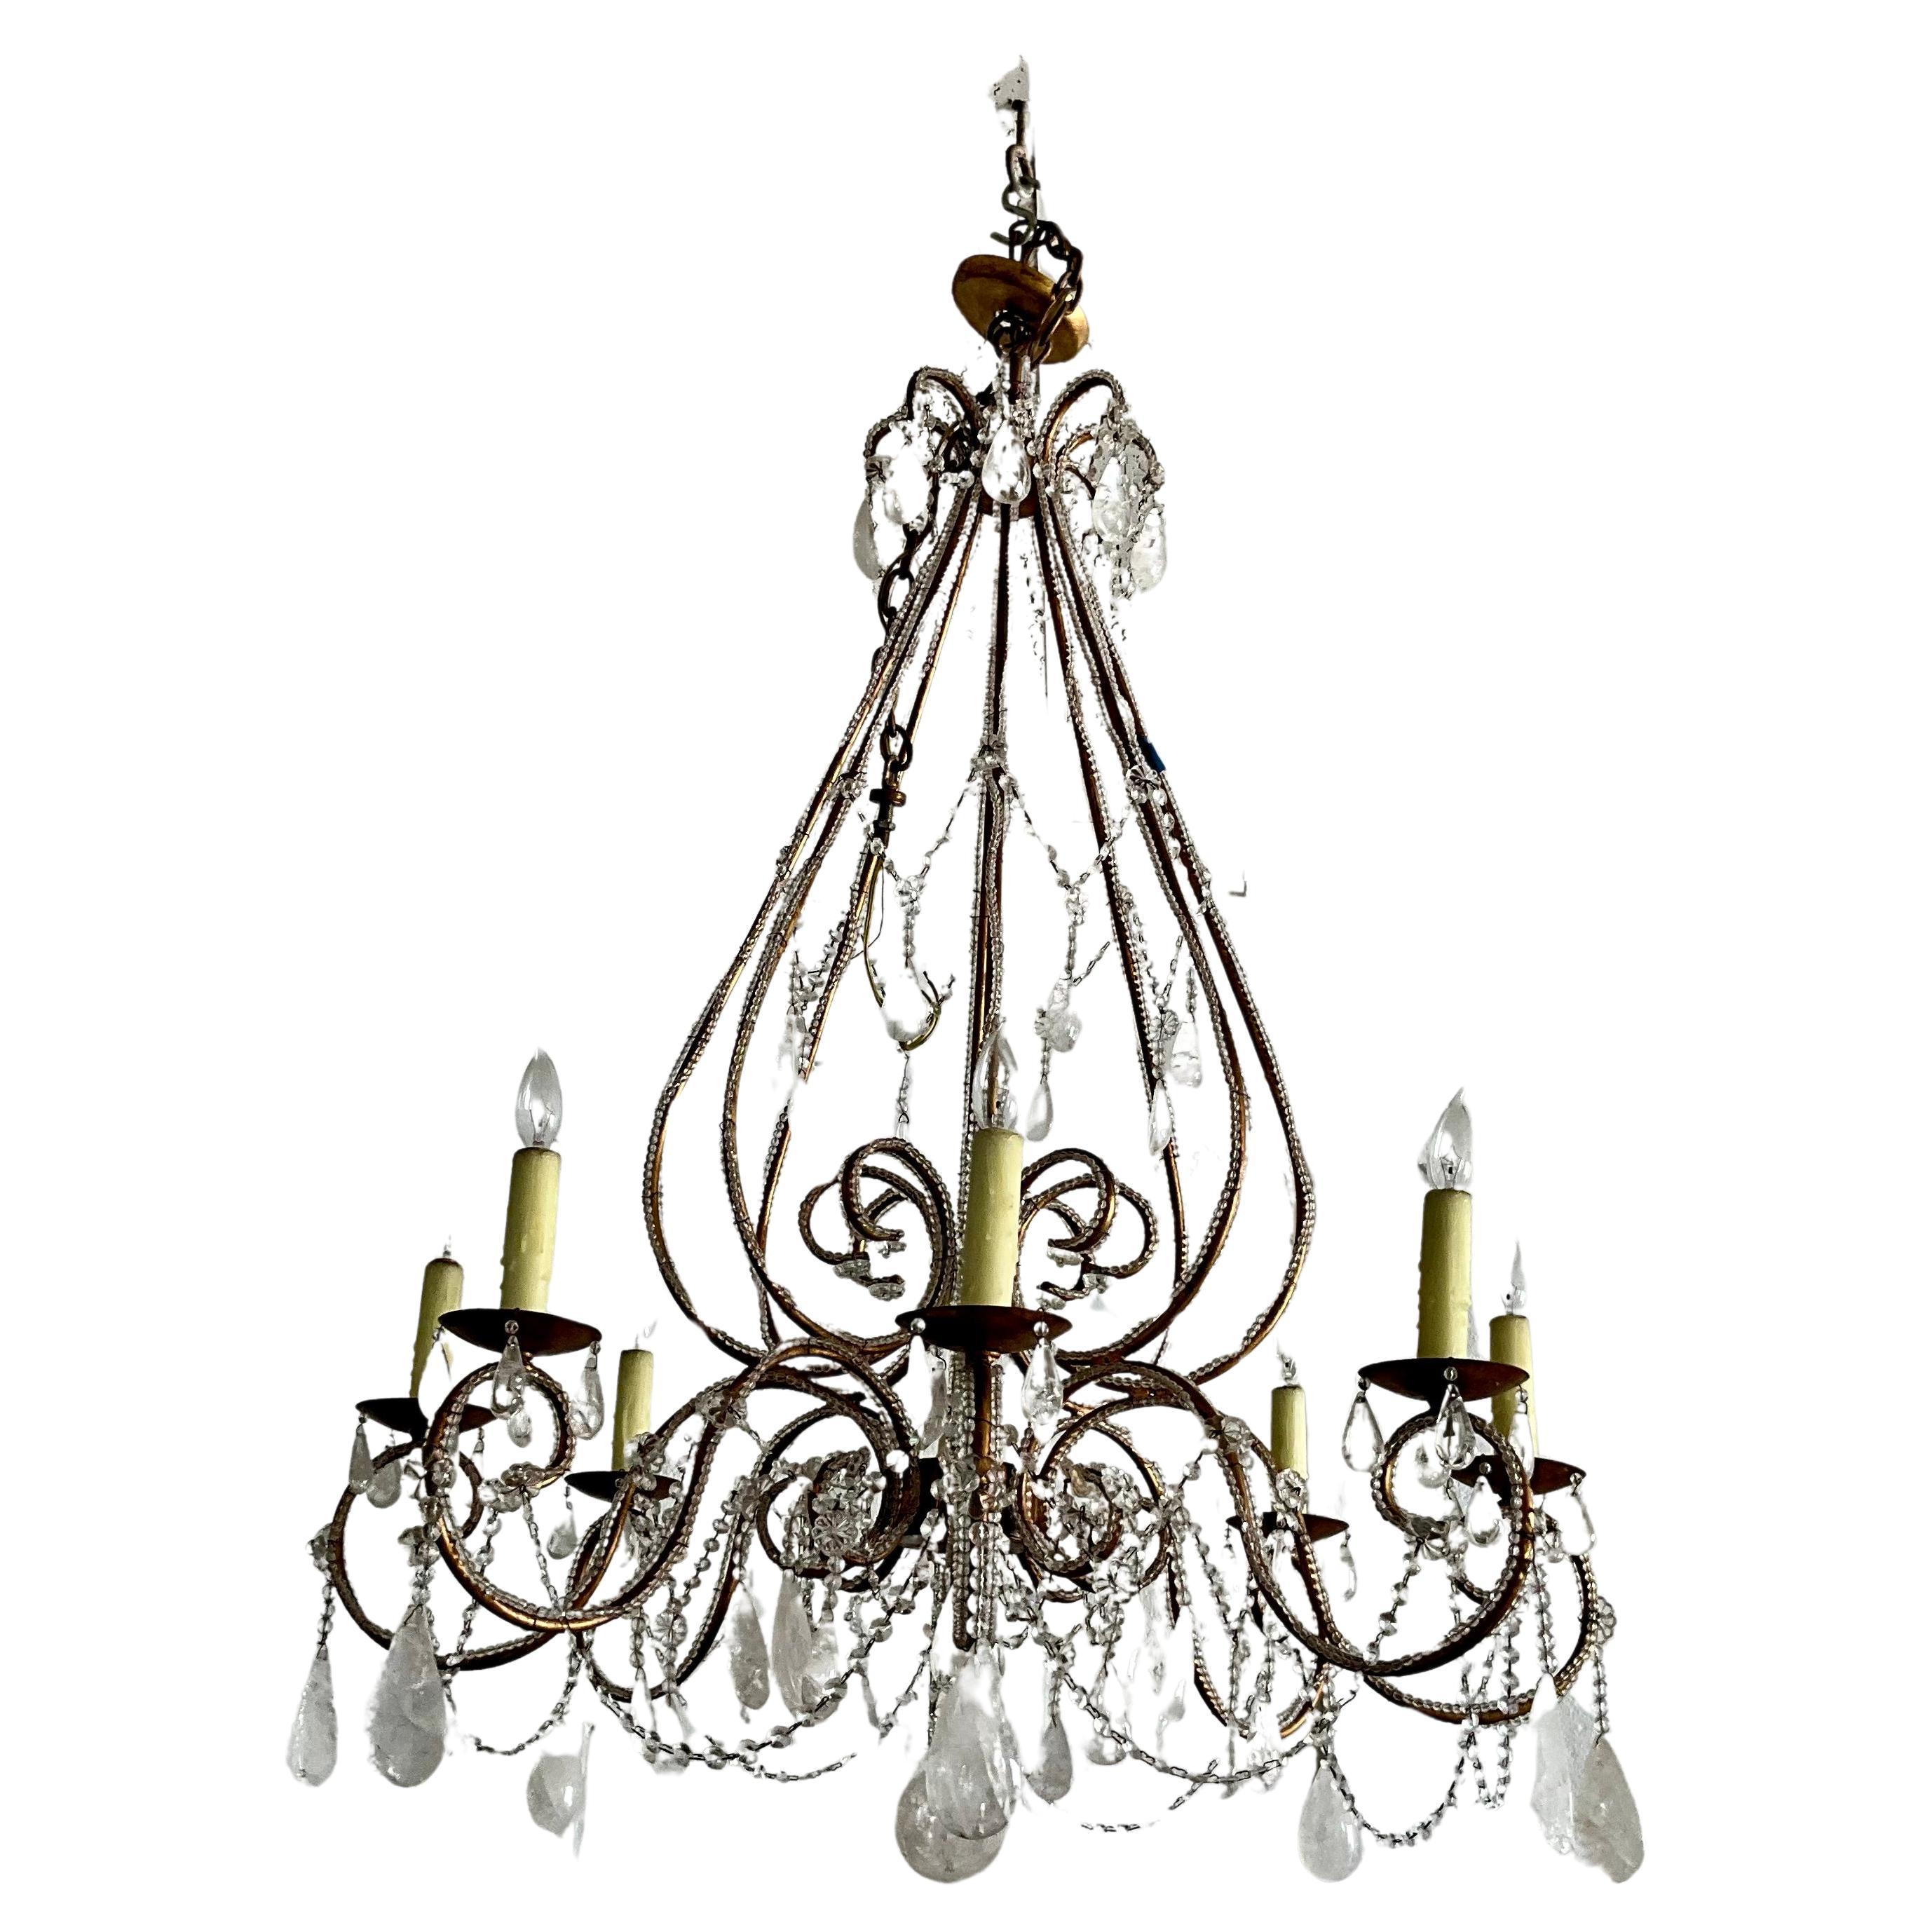 Large 8 Arm Venetian Tole and Rock Crystal Chandelier